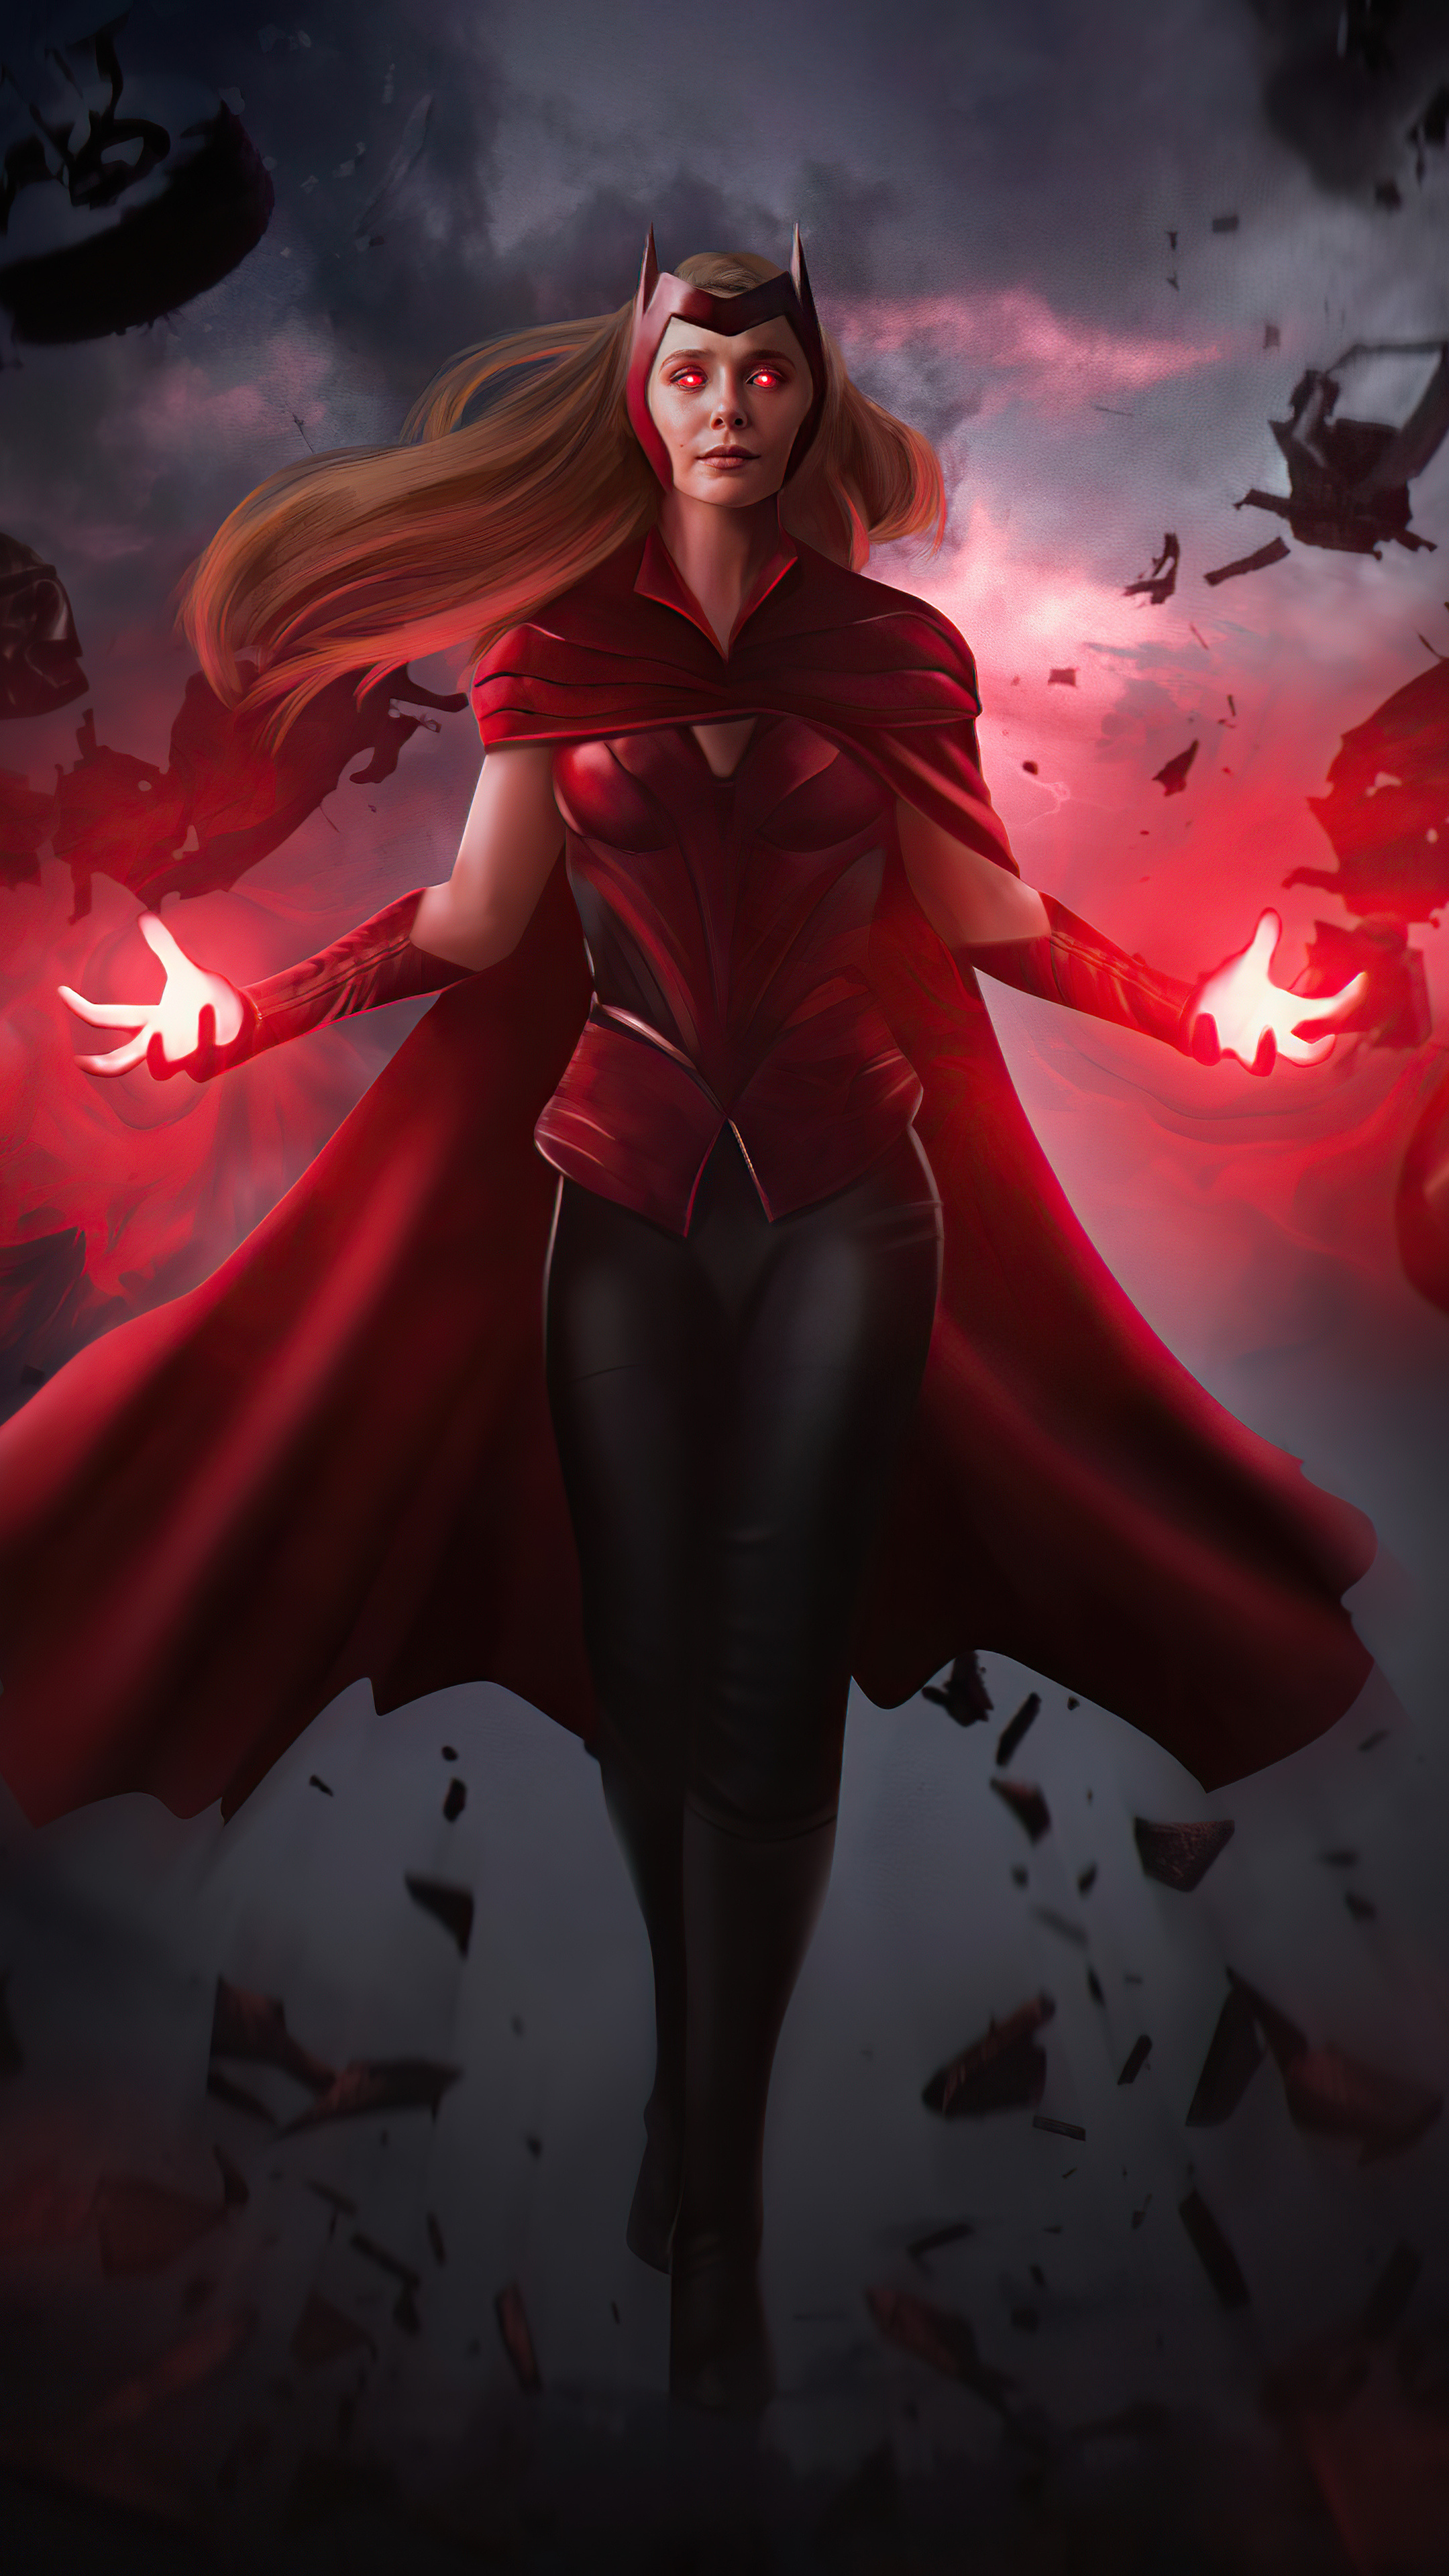 Scarlet Witch, Wanda Vision, Sony Xperia, 4K wallpapers, 2160x3840 4K Handy